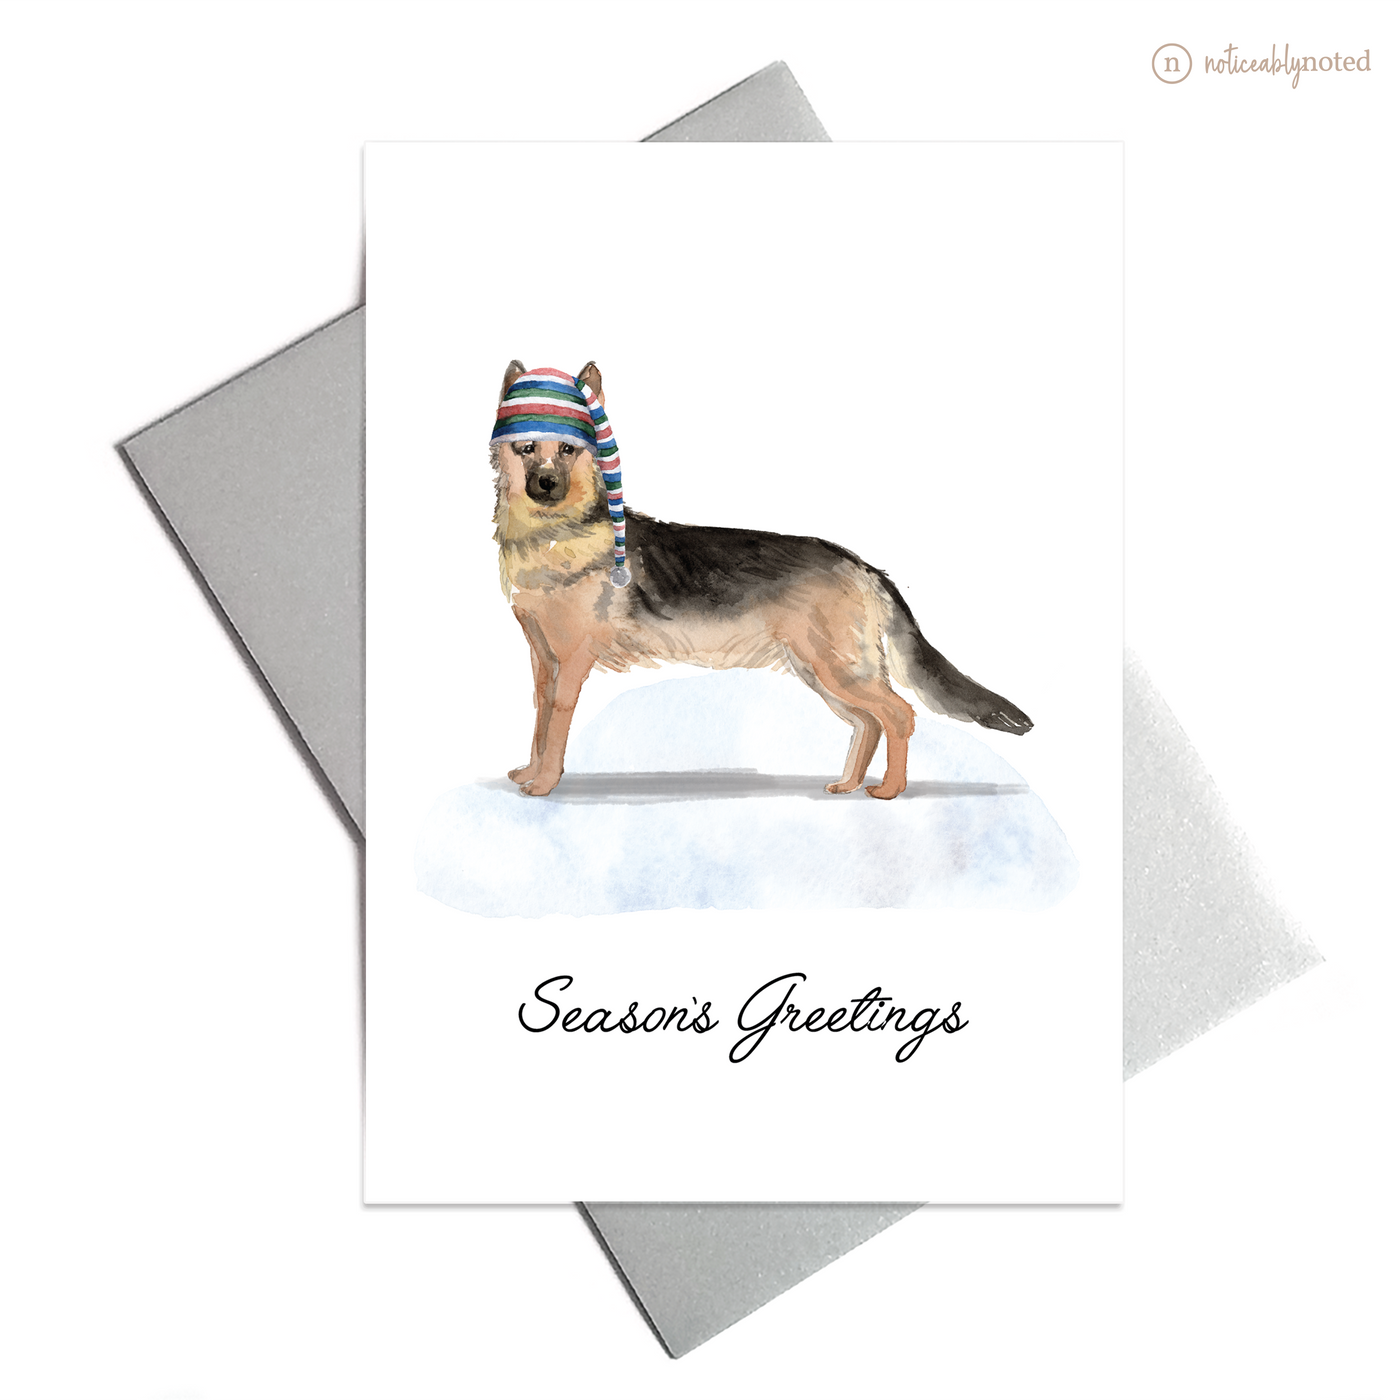 German Shepherd Dog Holiday Card | Noticeably Noted